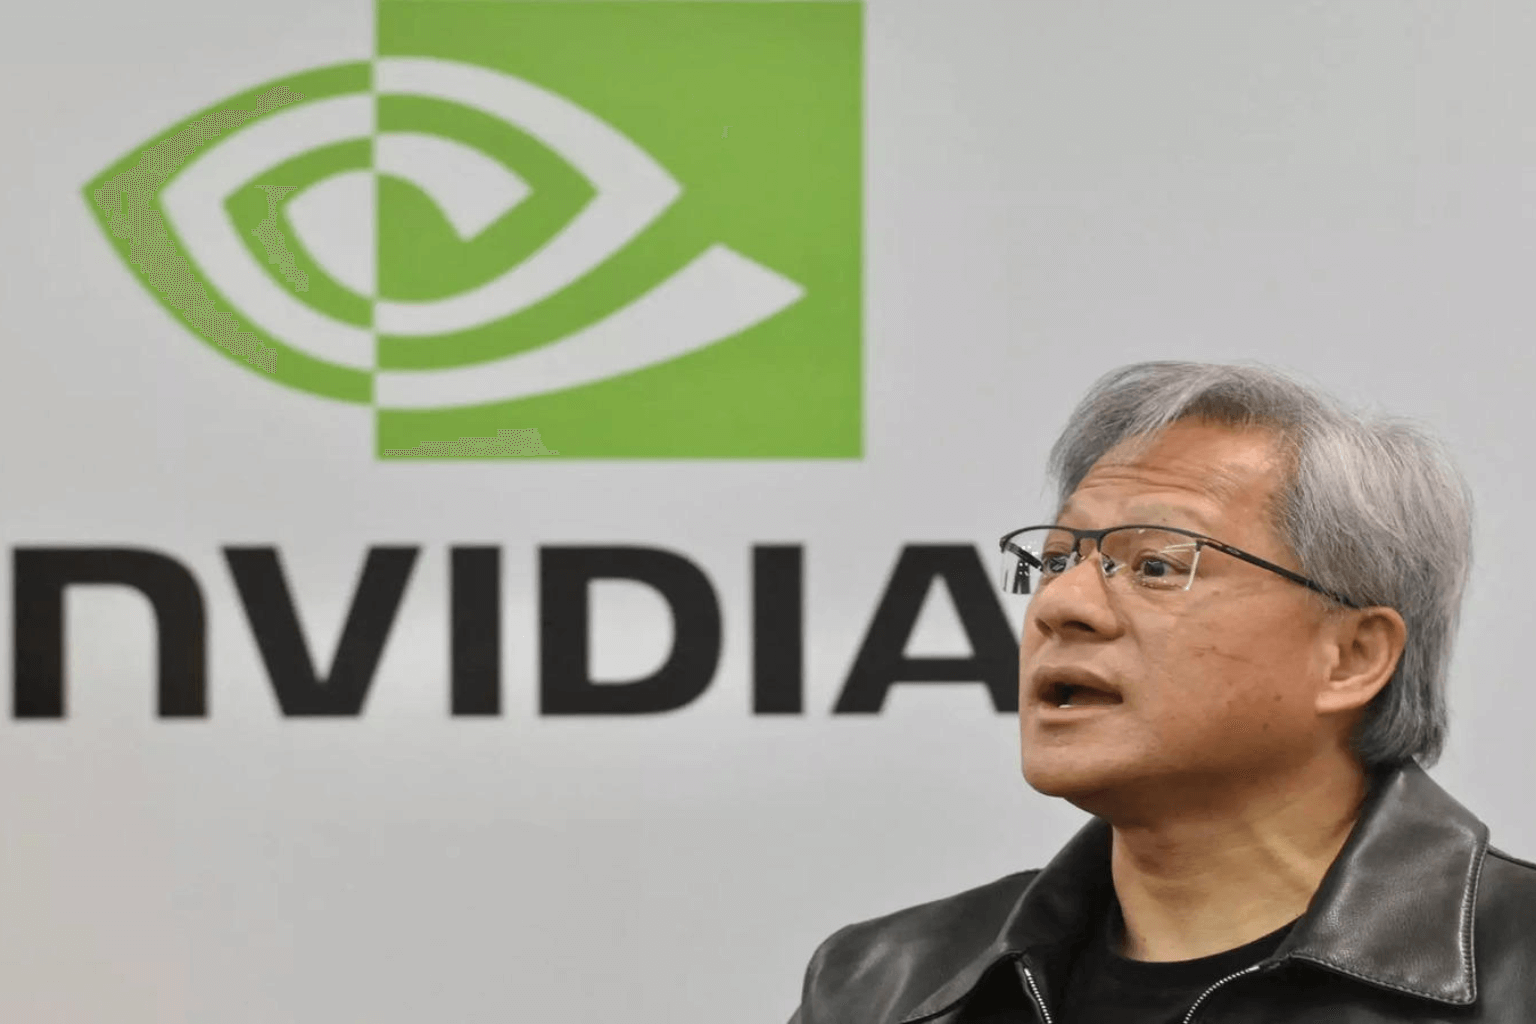 Nvidia CEO Jensen Huang Says OpenAI co-founder Ilya Sutskever started the deep learning revolution